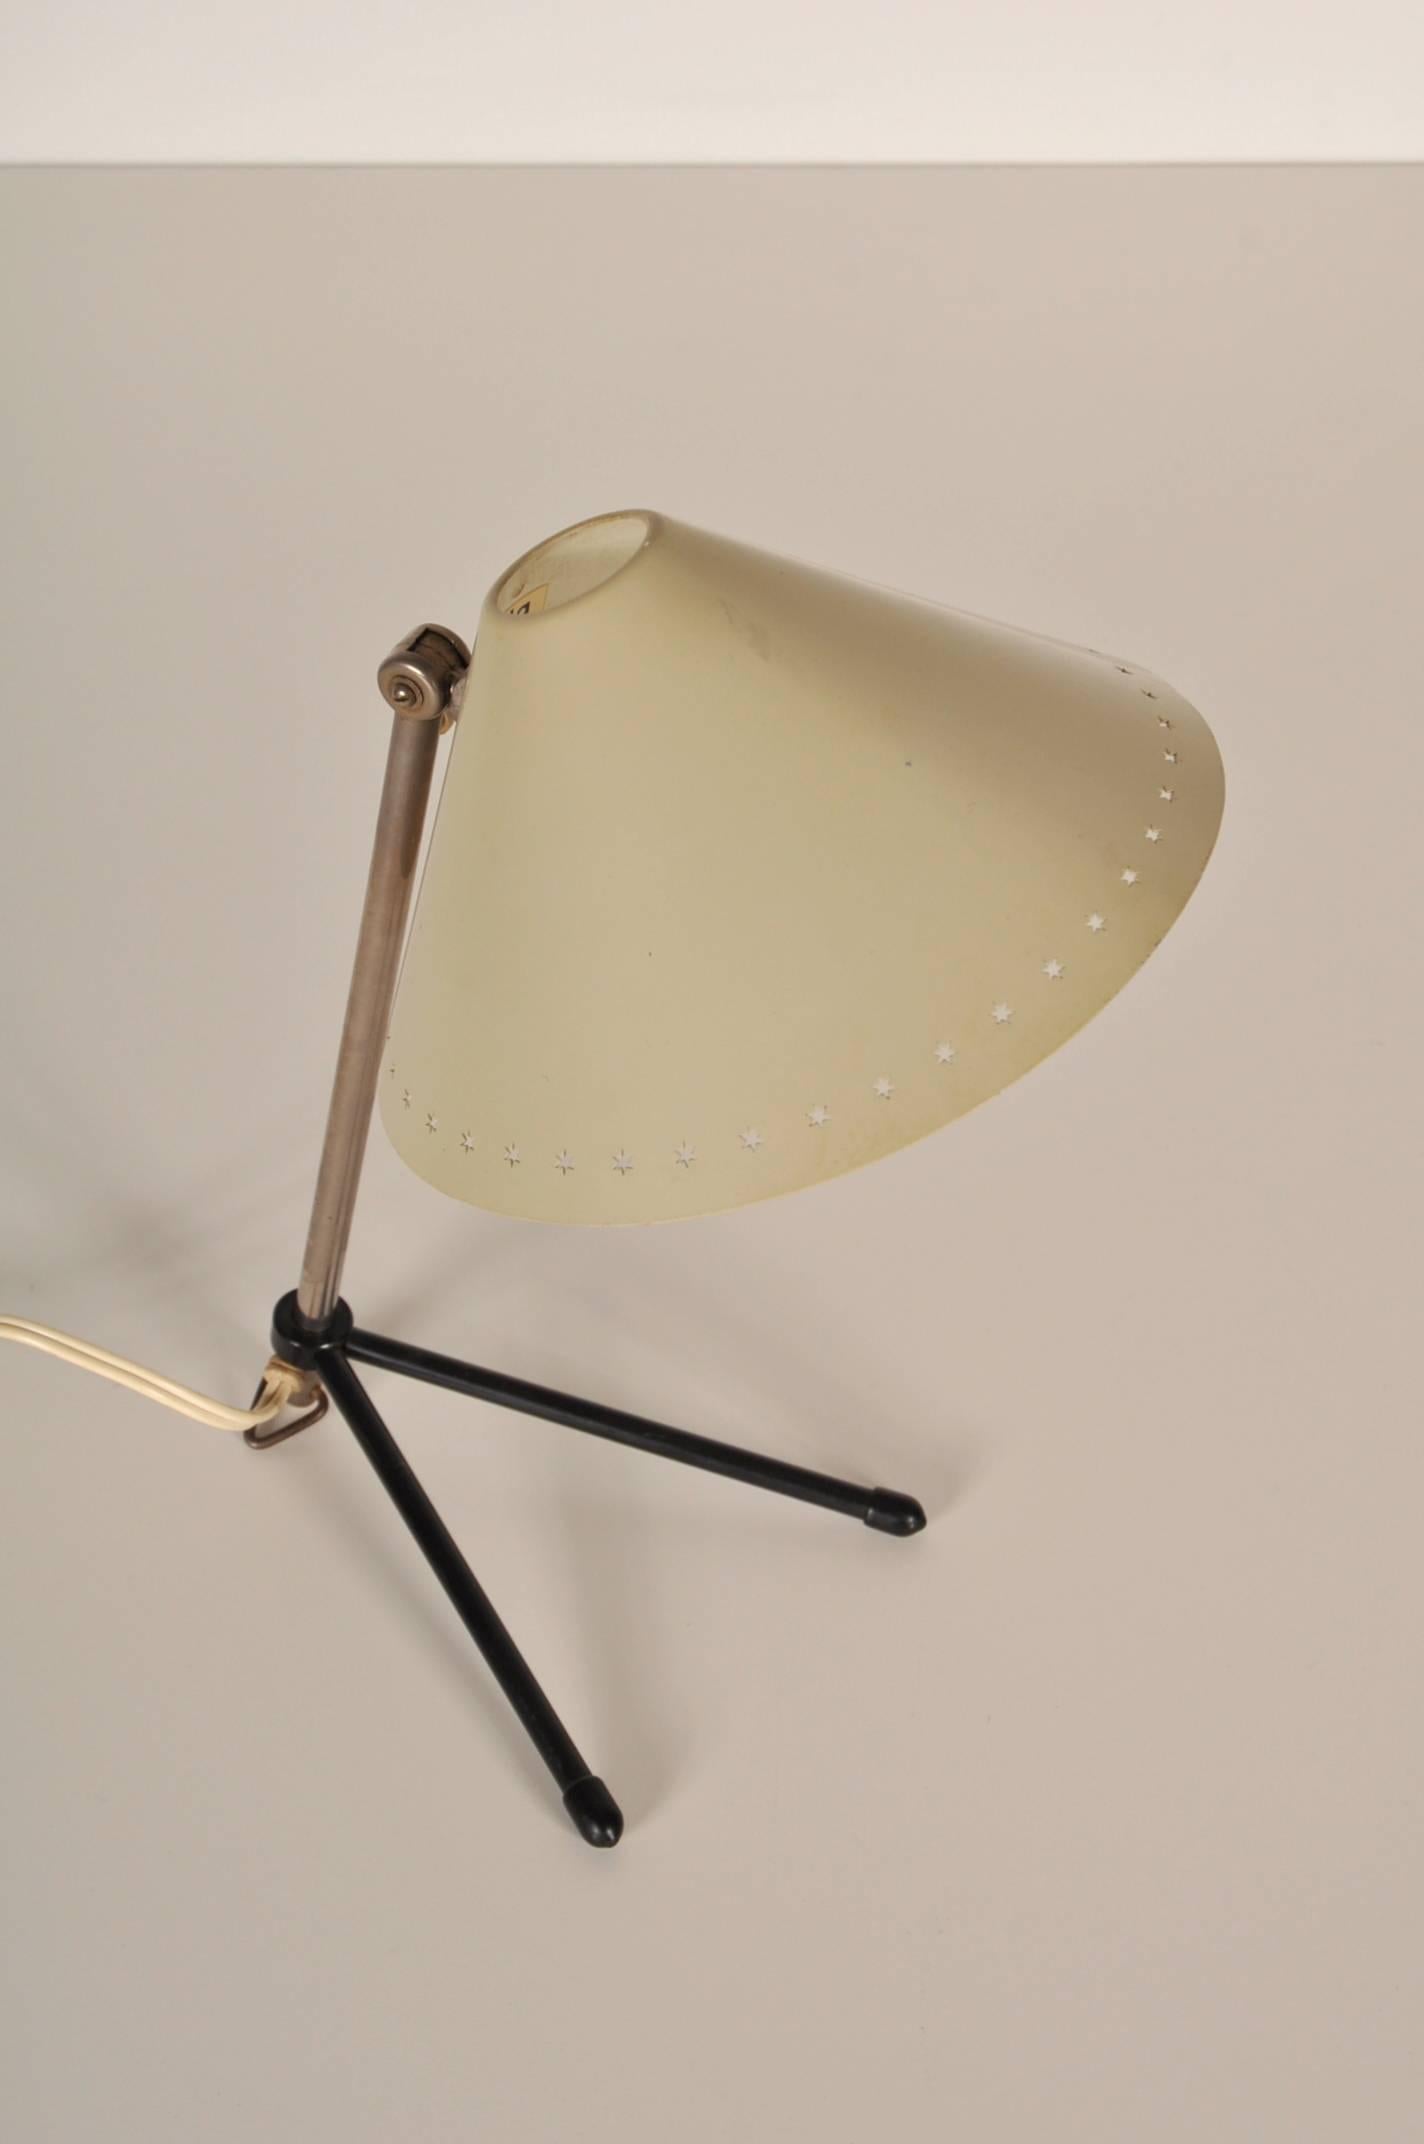 Lacquered Pinocchio Lamp by H. Busquet for Hala, Netherlands, circa 1950